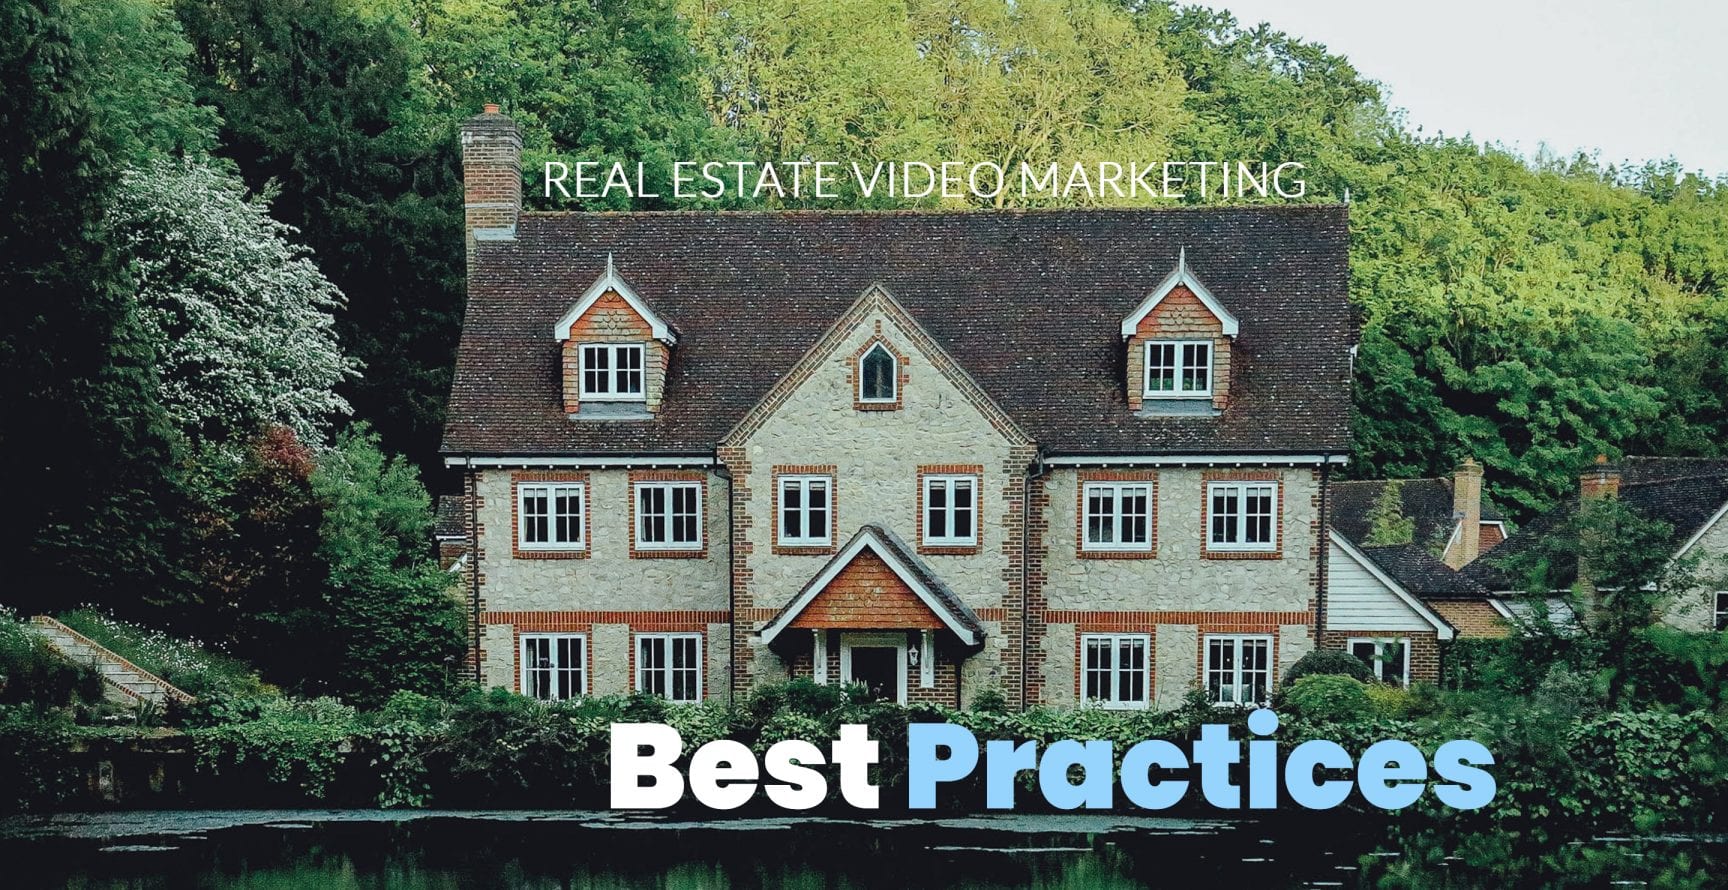 Real Estate Video Marketing Best Practices - Country House